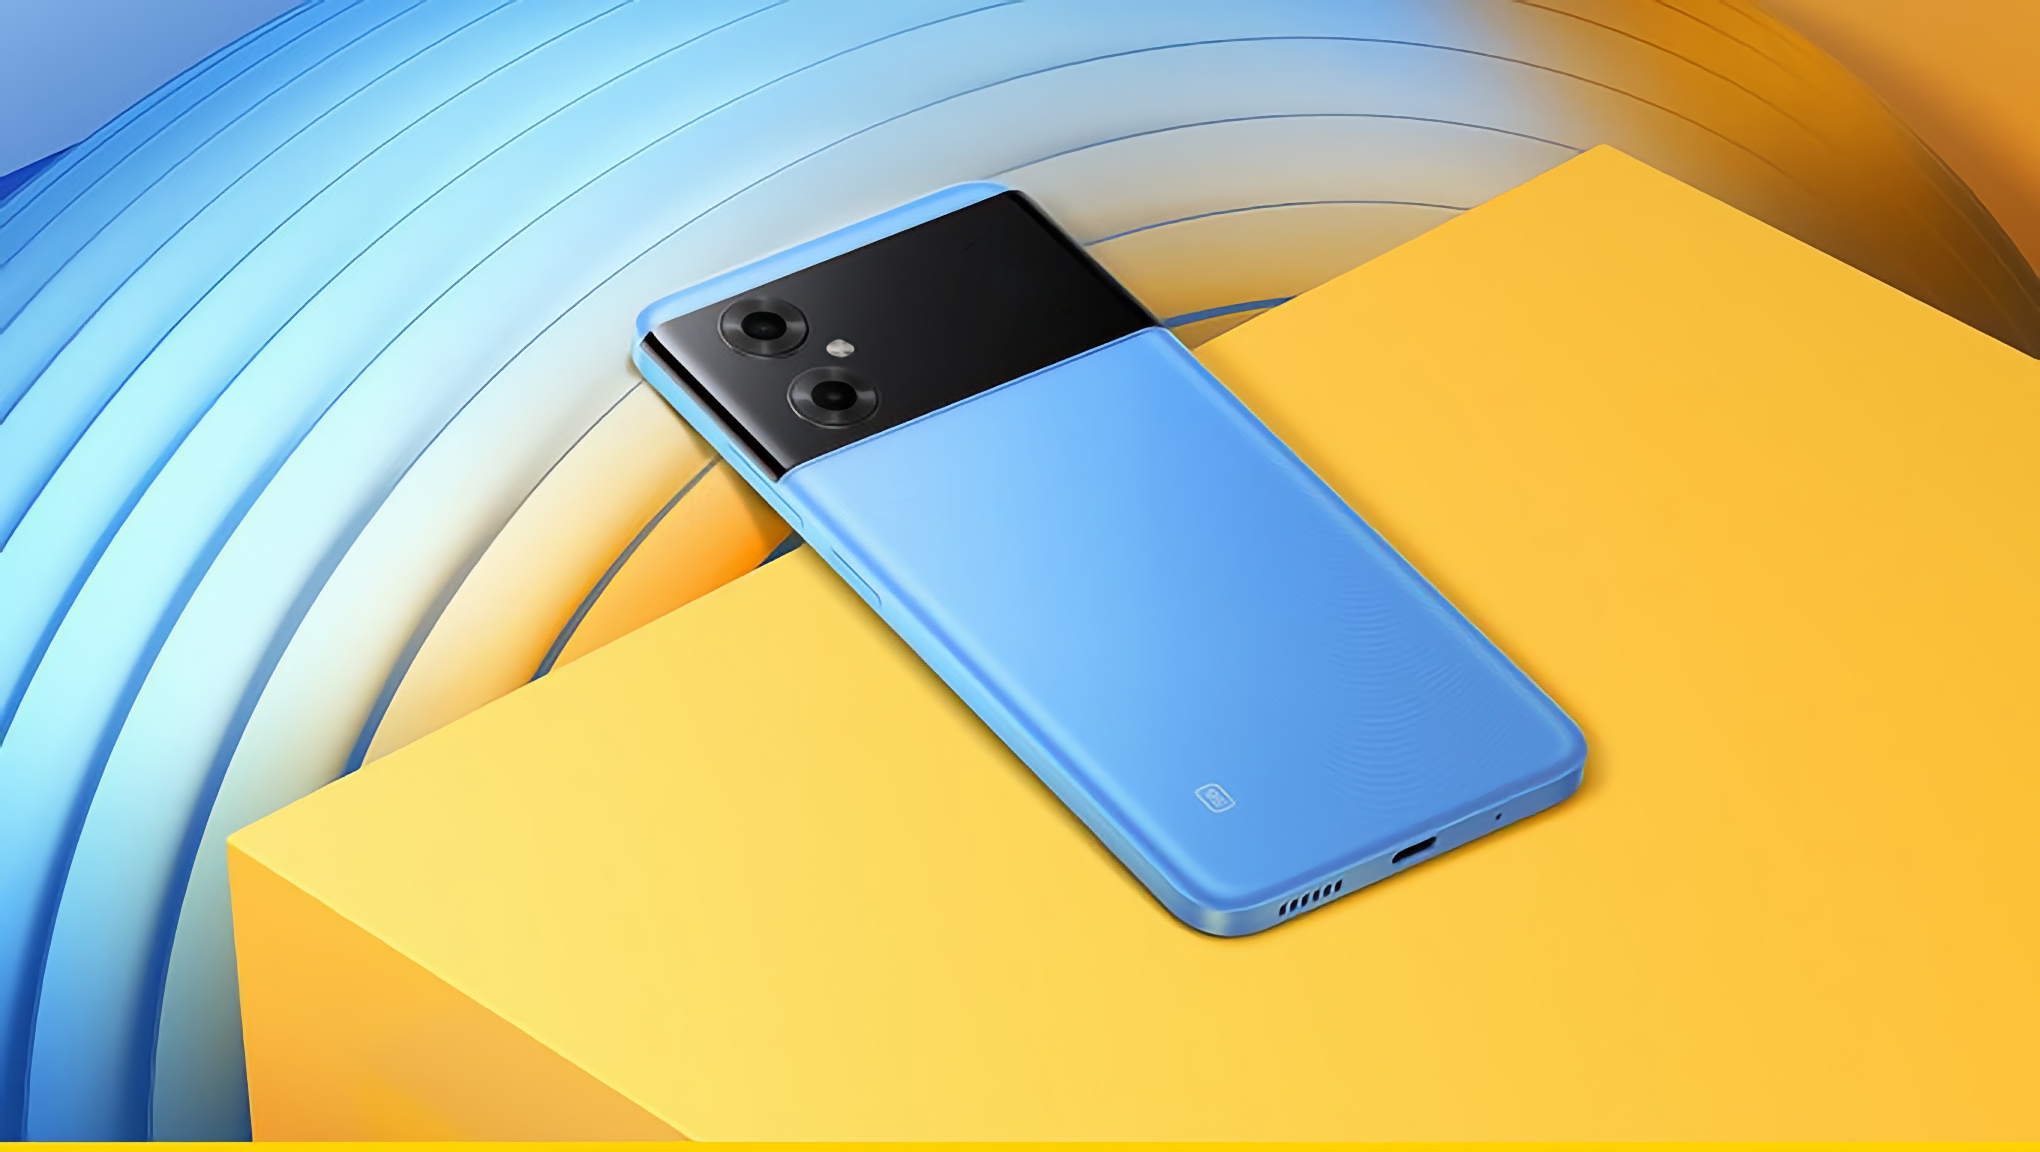 A copy of POCO M4 5G: Xiaomi will unveil the Redmi Note 11R smartphone with a MediaTek Dimensity 700 chip on September 30